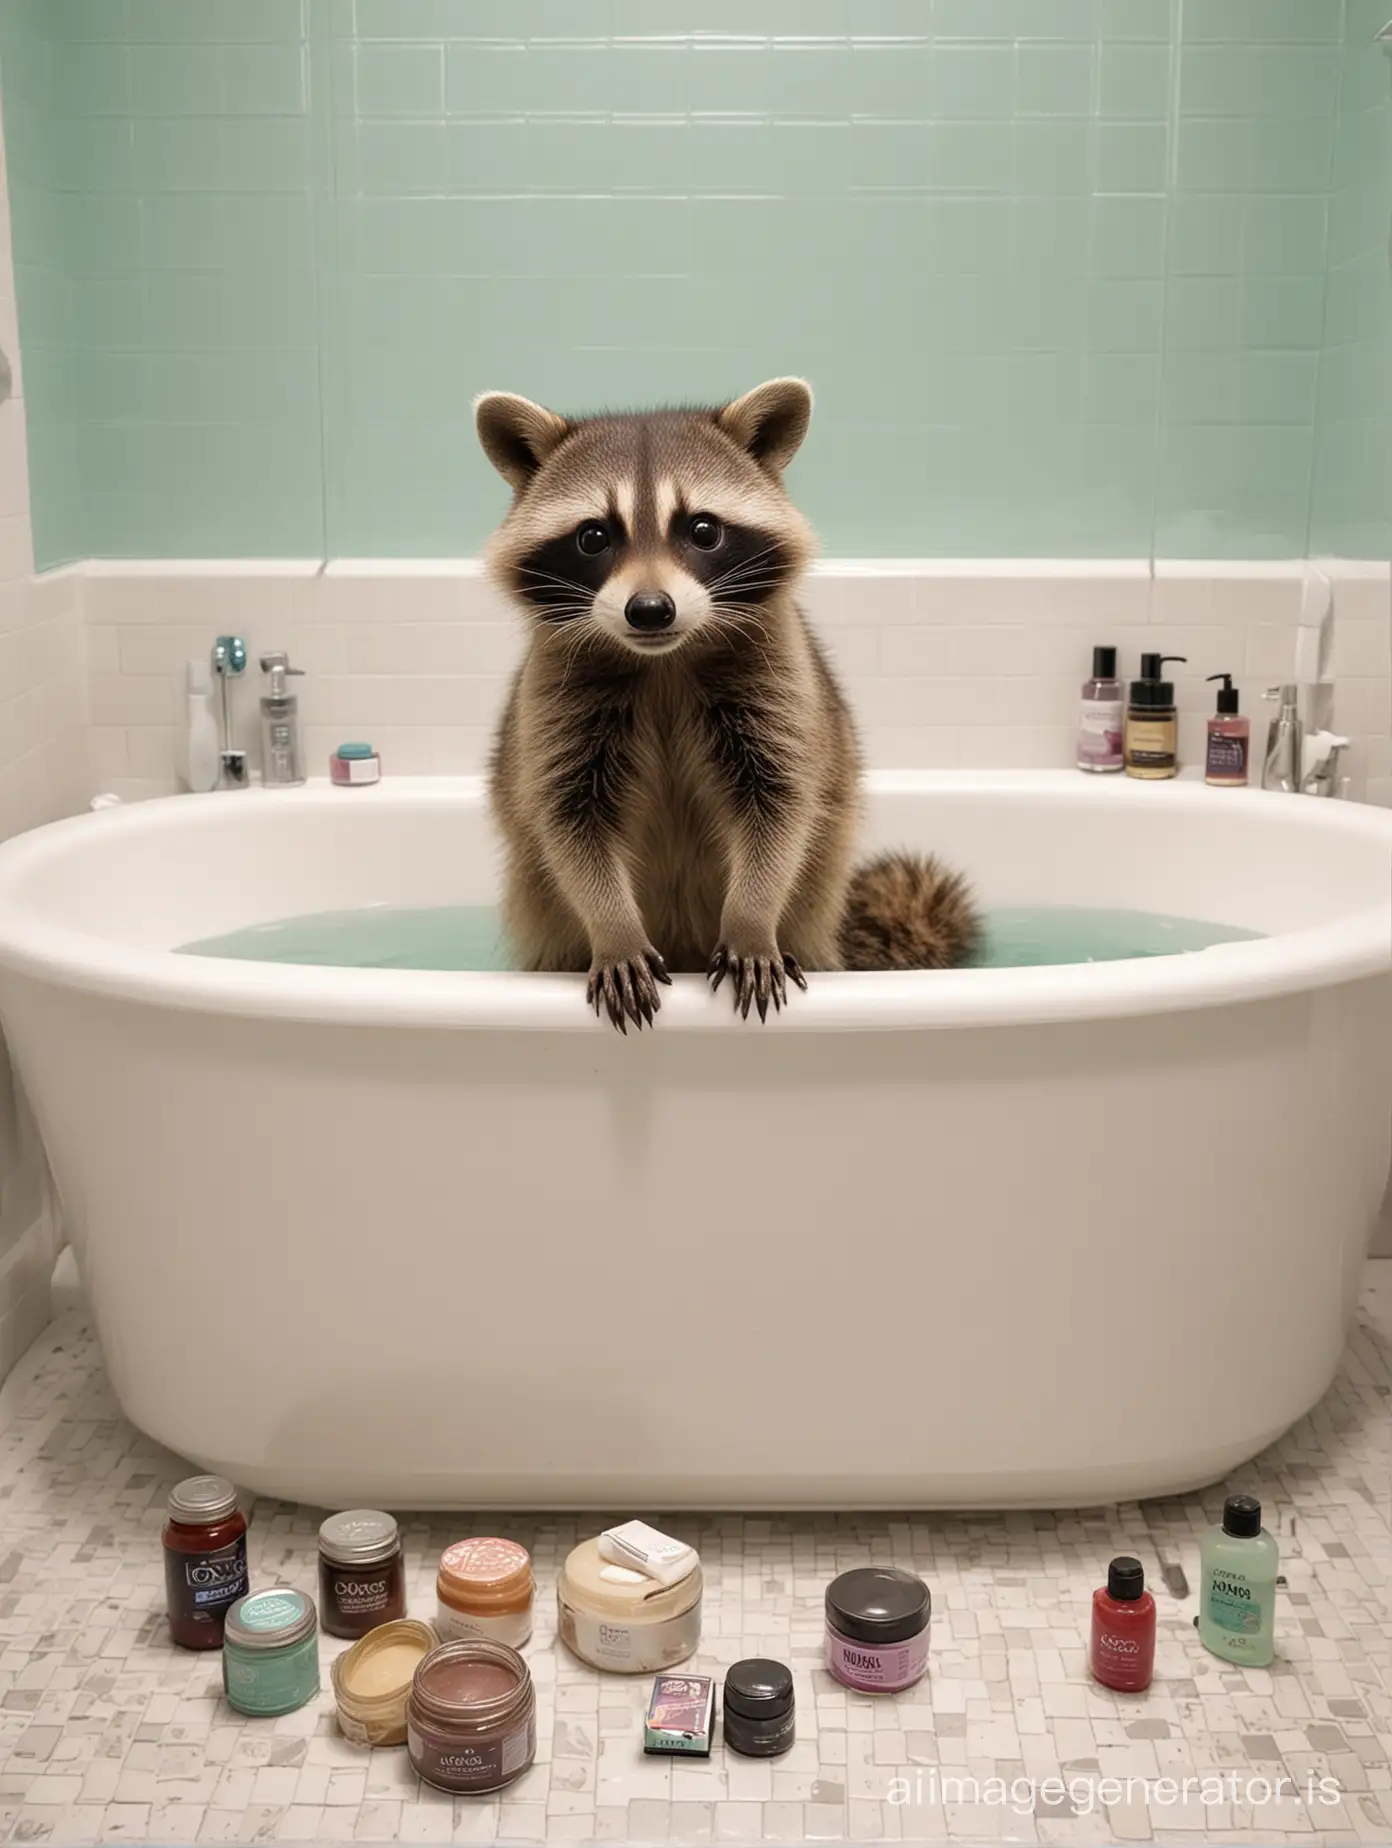 The little raccoon is taking a bath, and the whole bathroom is filled with jars of cosmetics and gels from the Avon company.